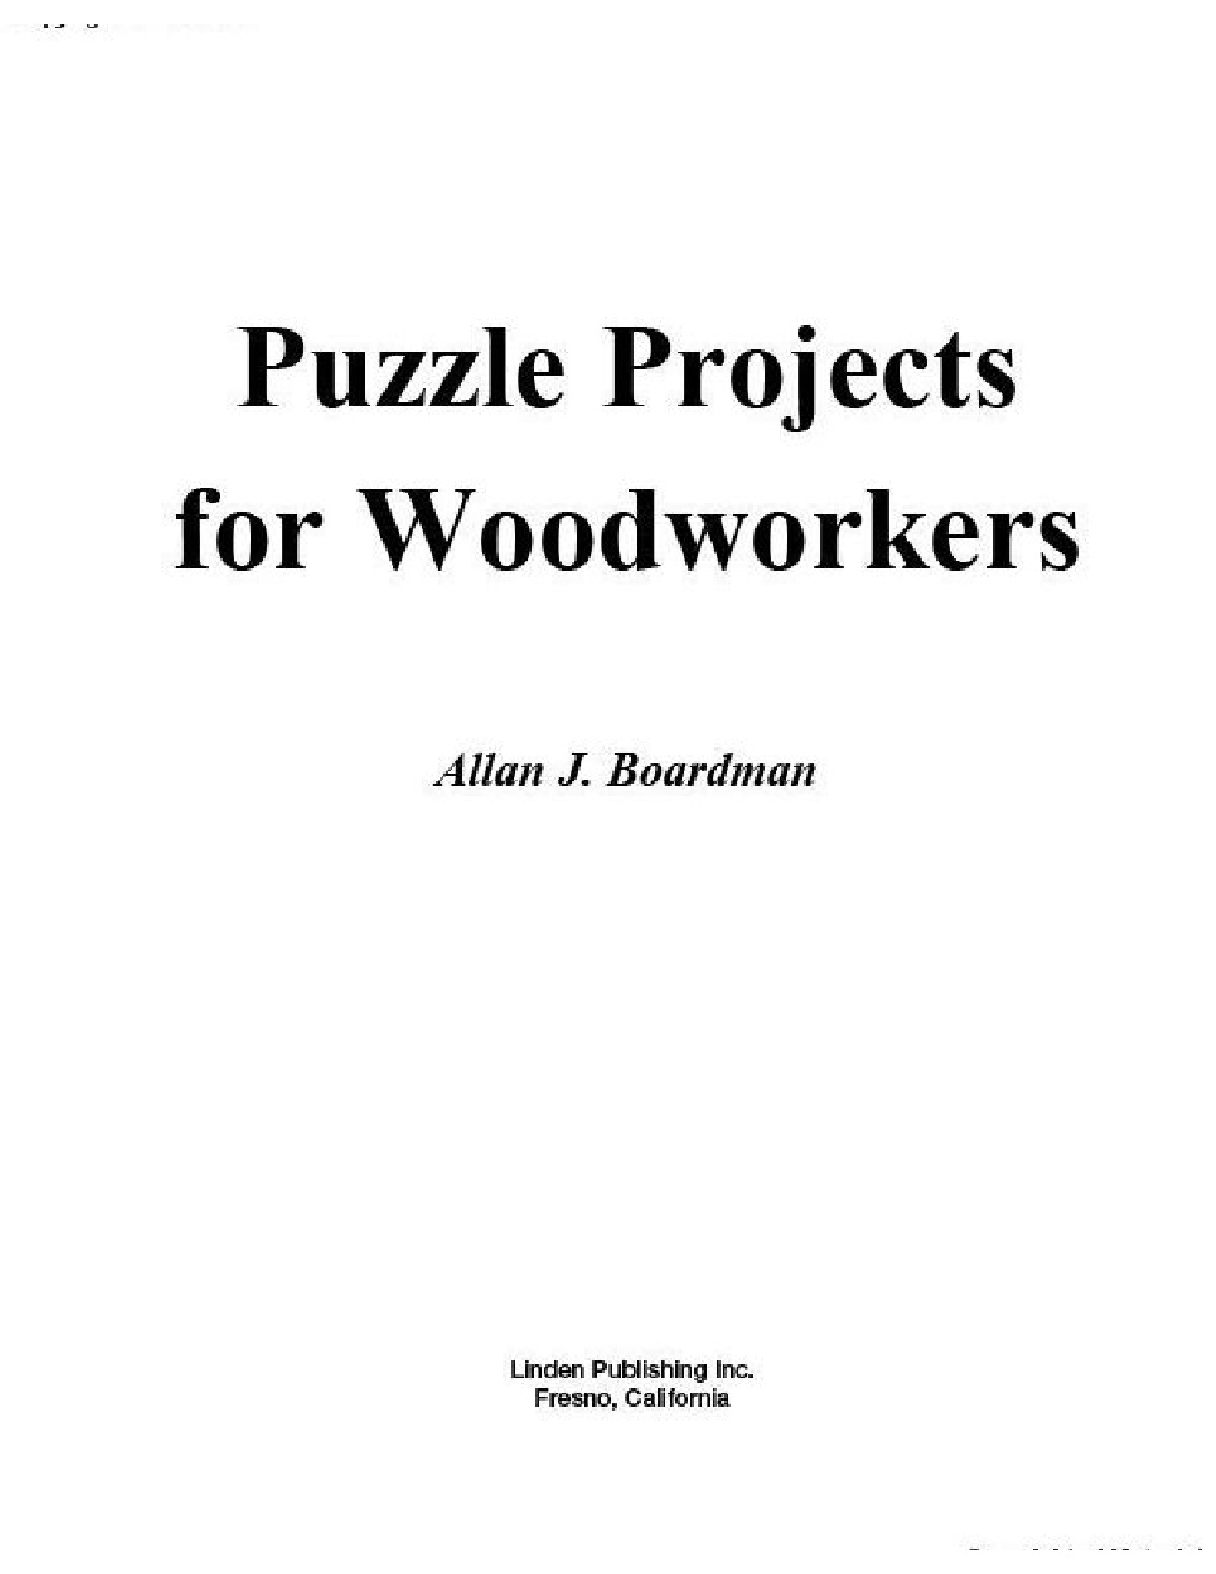 Puzzle Projects for Woodworkers 2007_益智项目木材